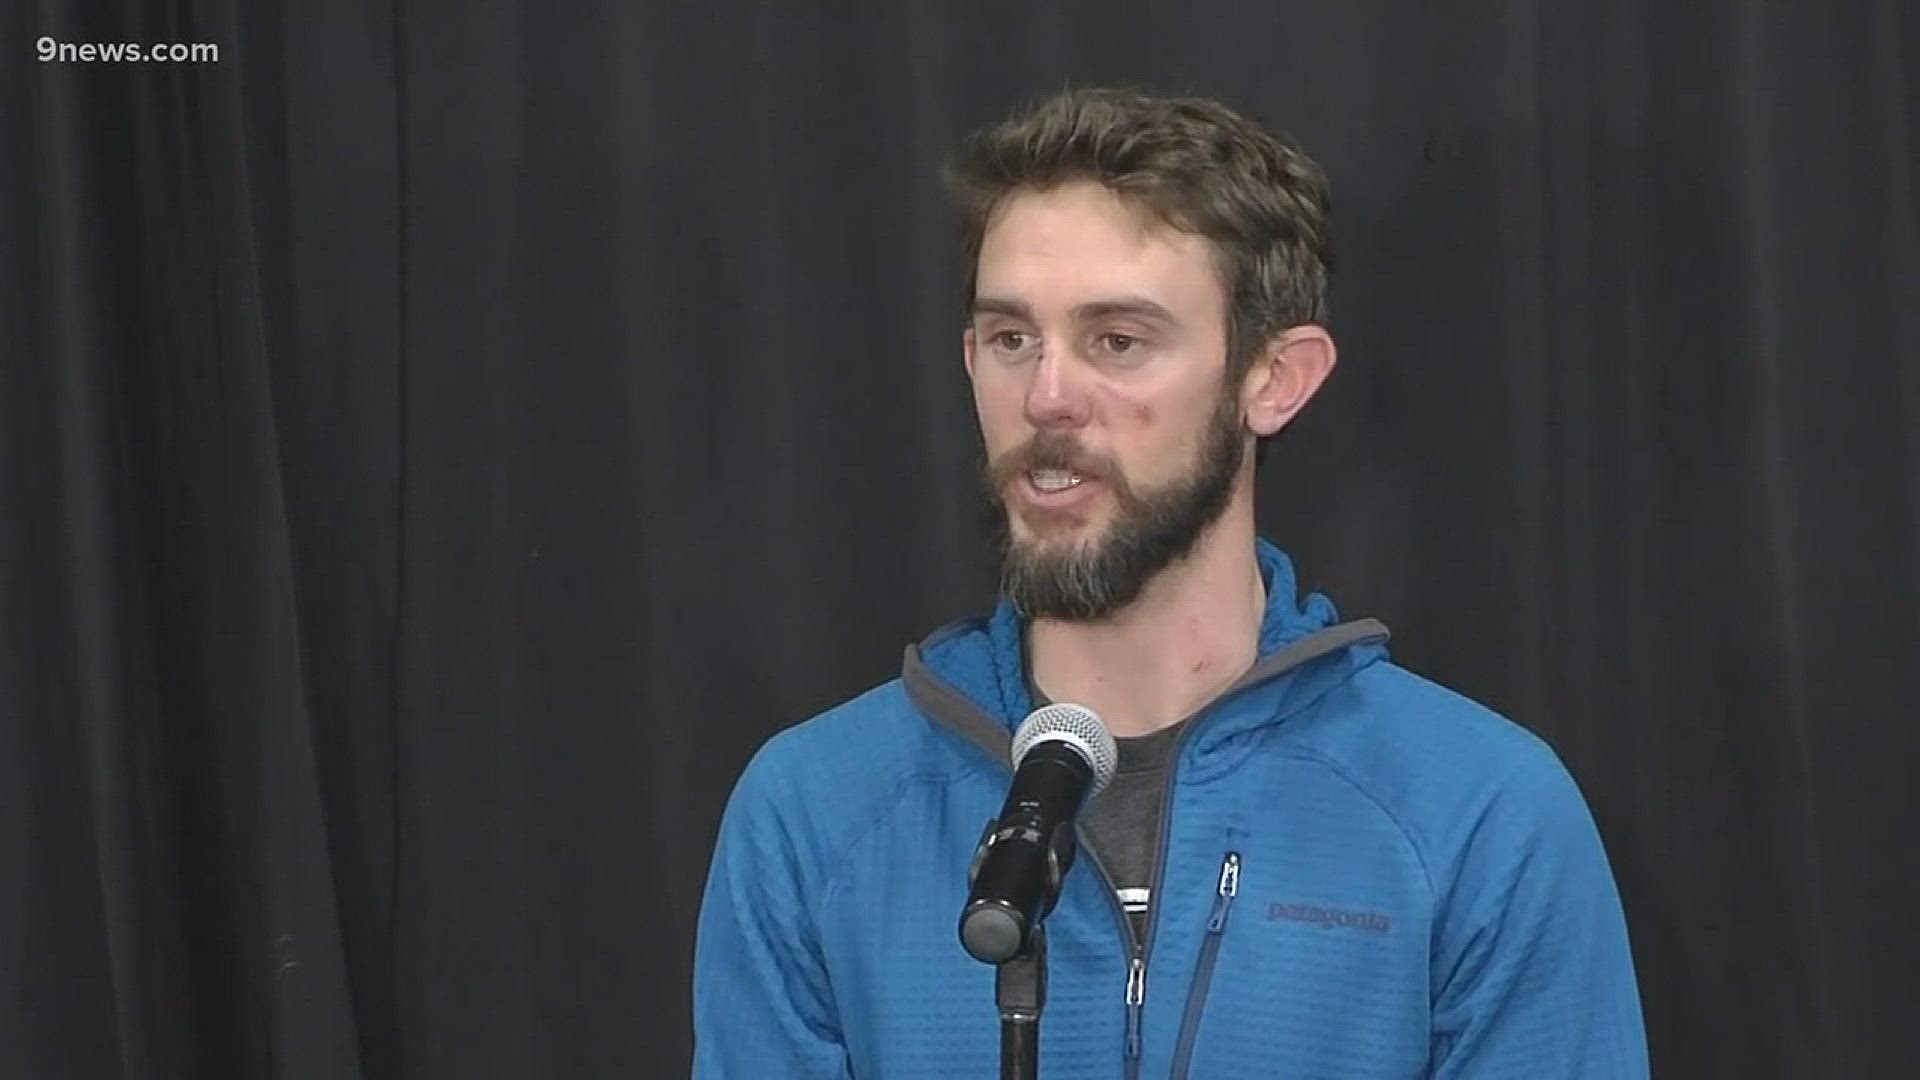 Colorado Parks and Wildlife said the man, identified on Thursday as 31-year-old Travis Kauffman, is "recovering well" after the self-defense attack on Feb. 5.